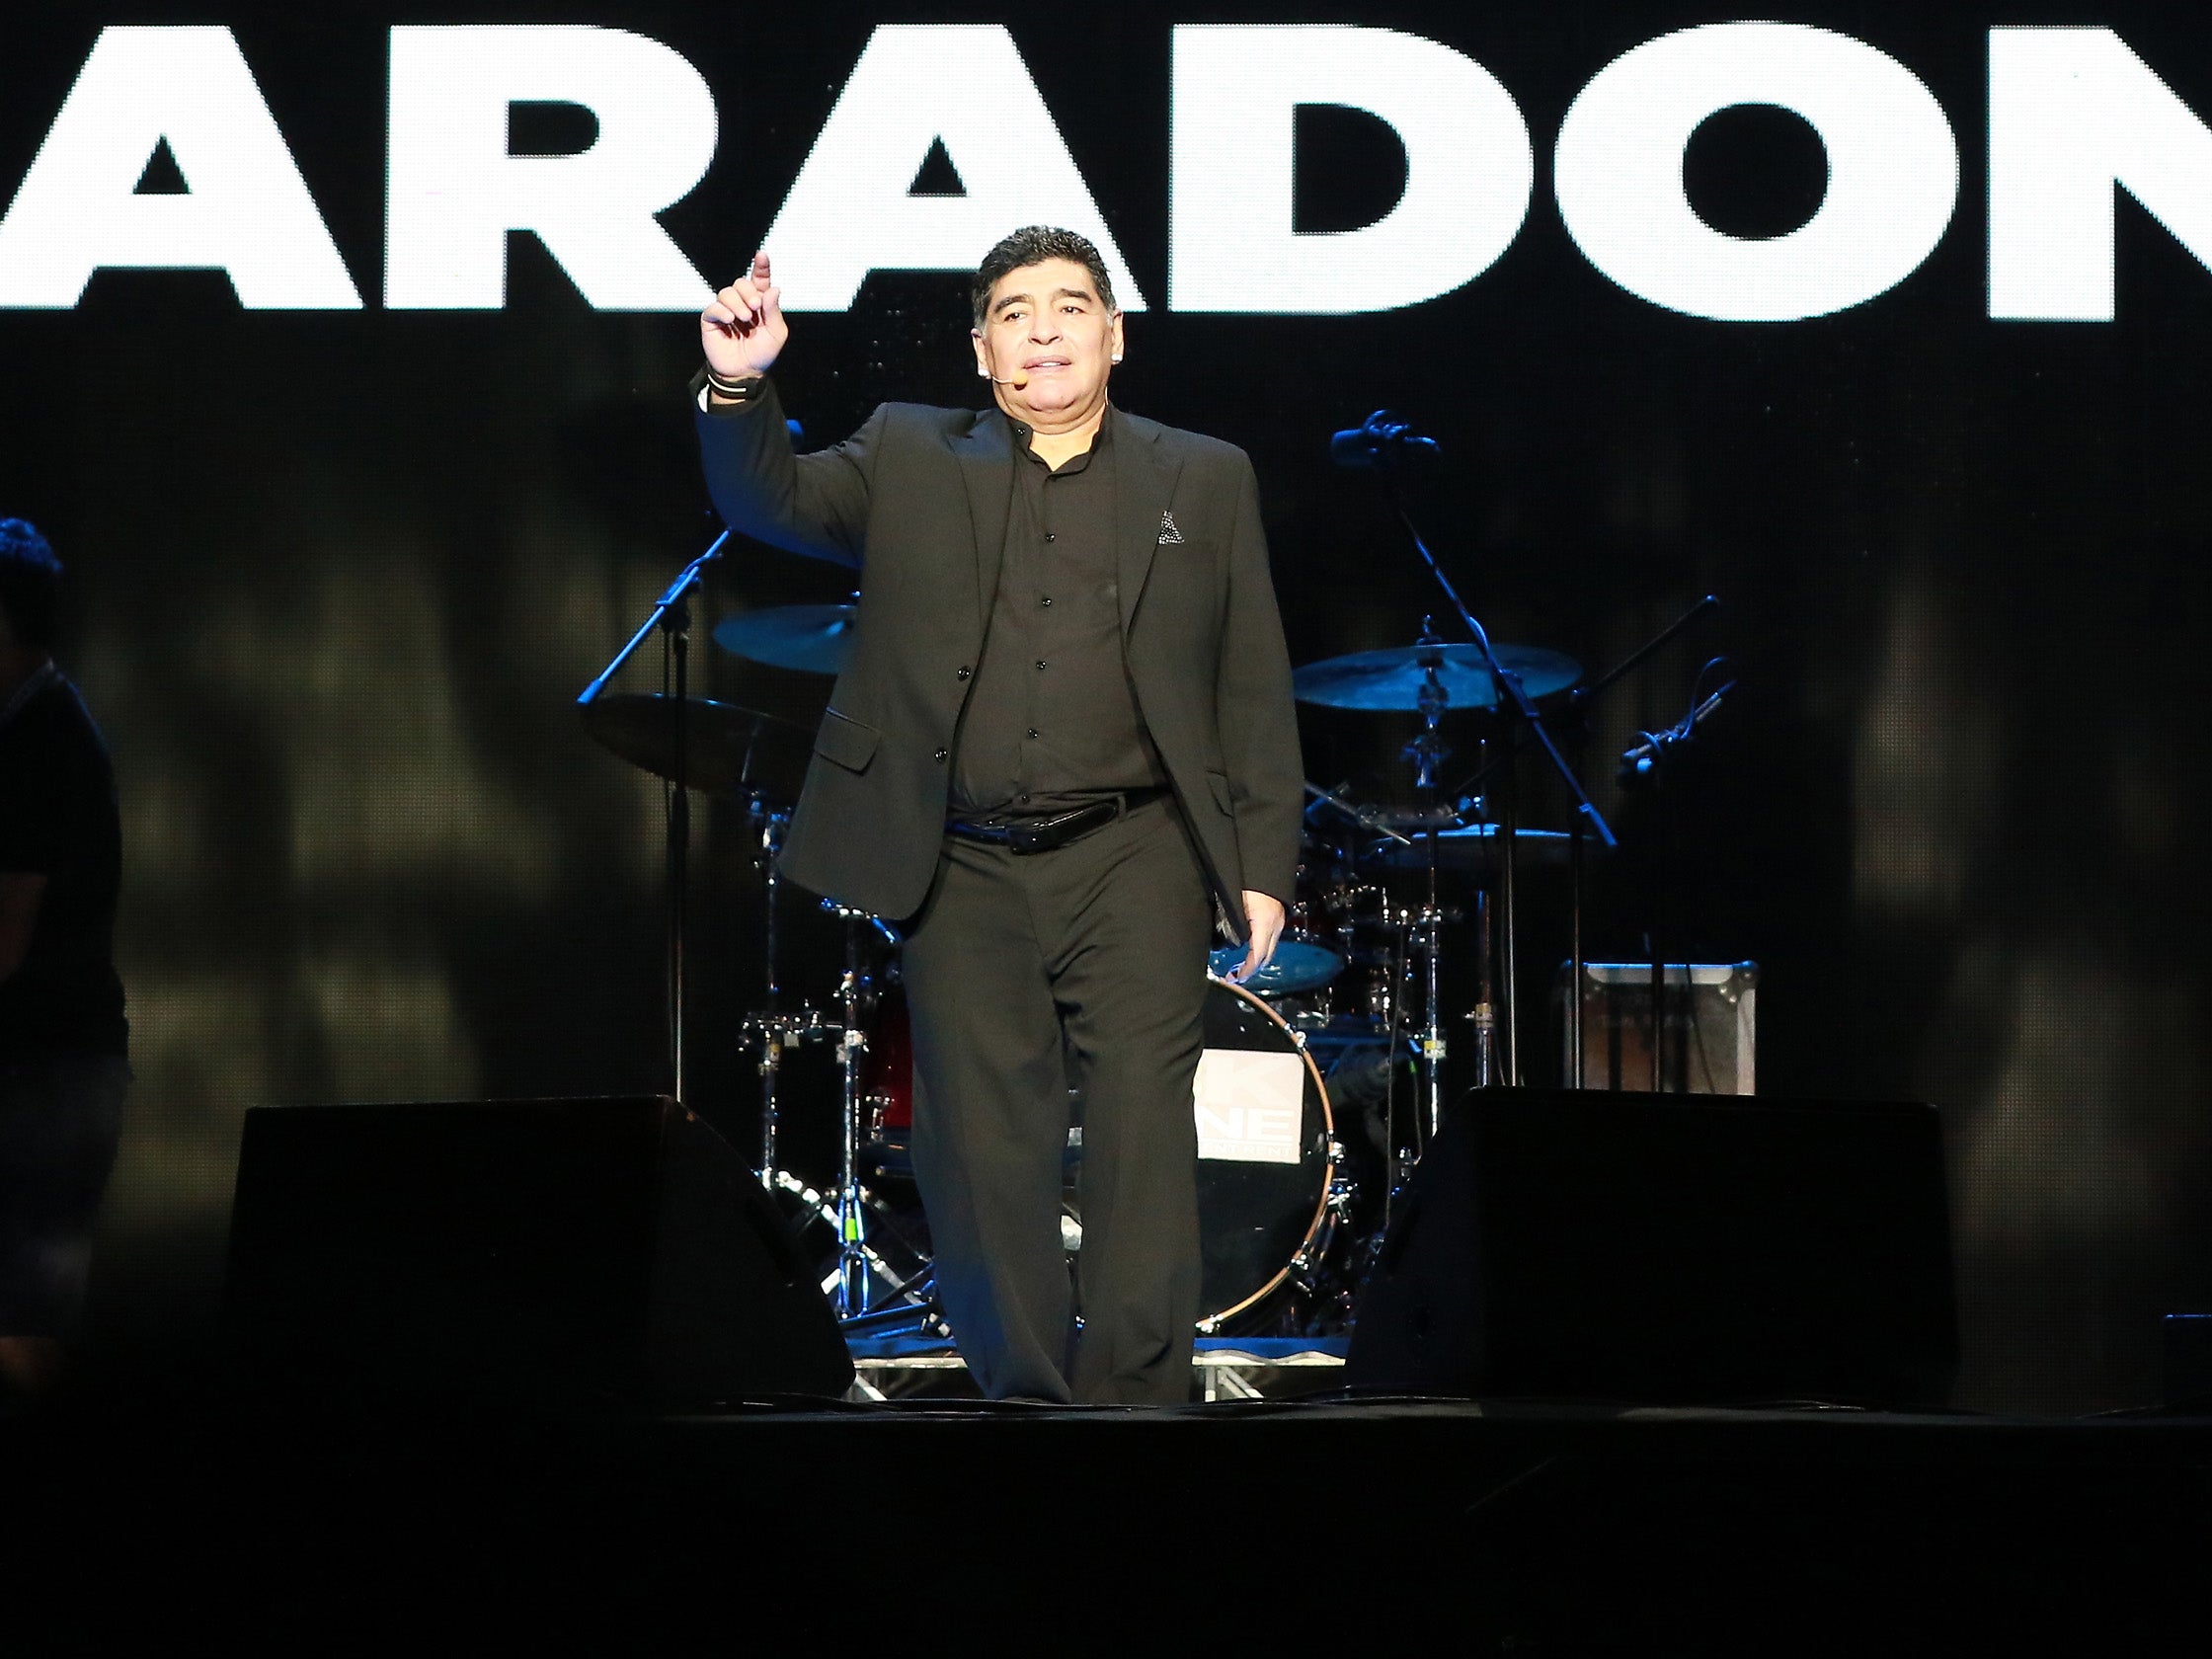 Maradona took to the stage to receive the adulation of the thousands in attendance